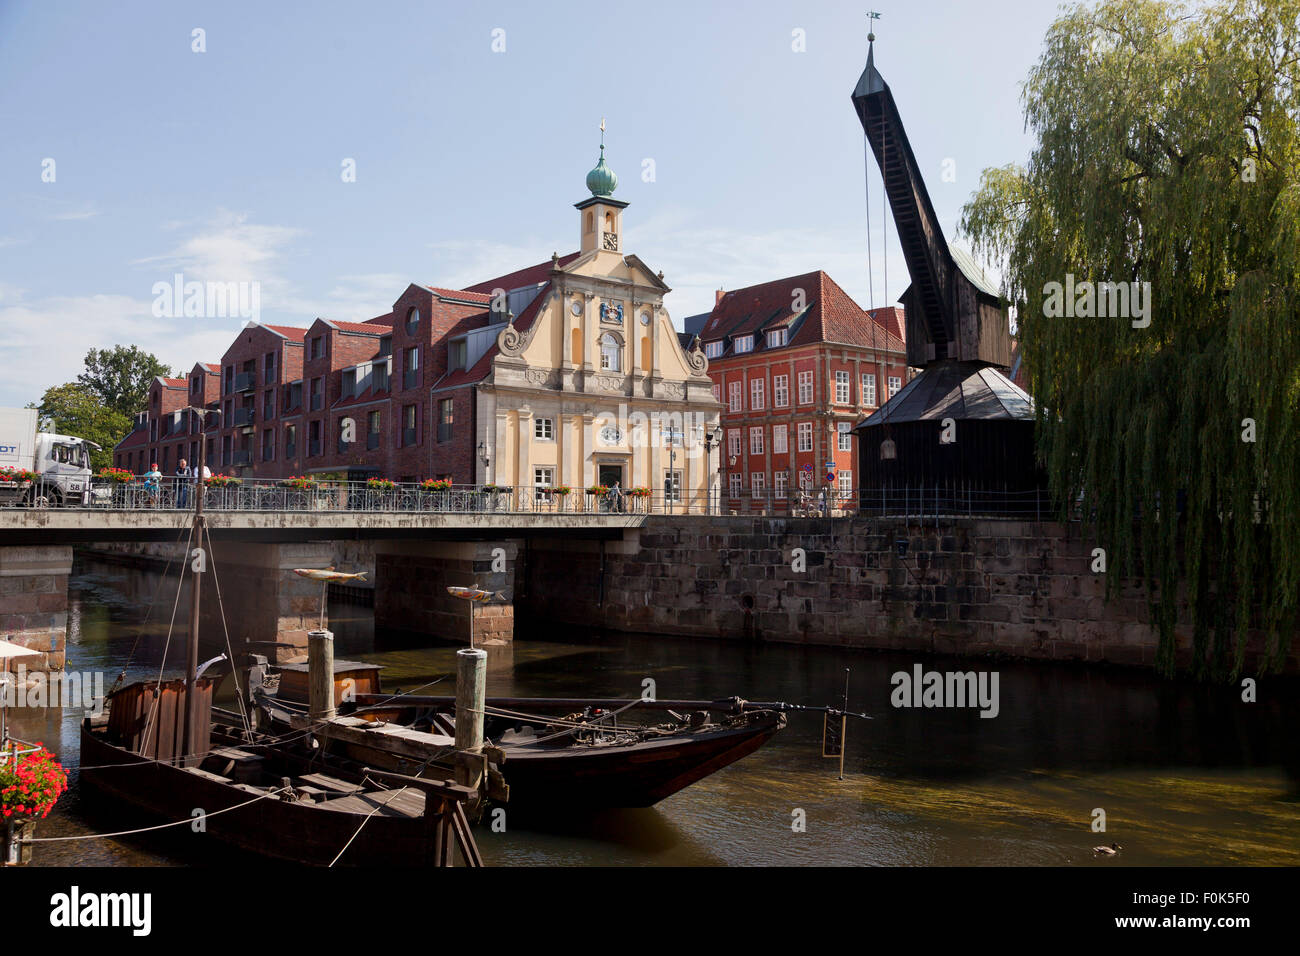 old harbour with treadwheel crane and Altes Kaufhaus, Hanseatic Town of Lüneburg, Lower Saxony, Germany Stock Photo